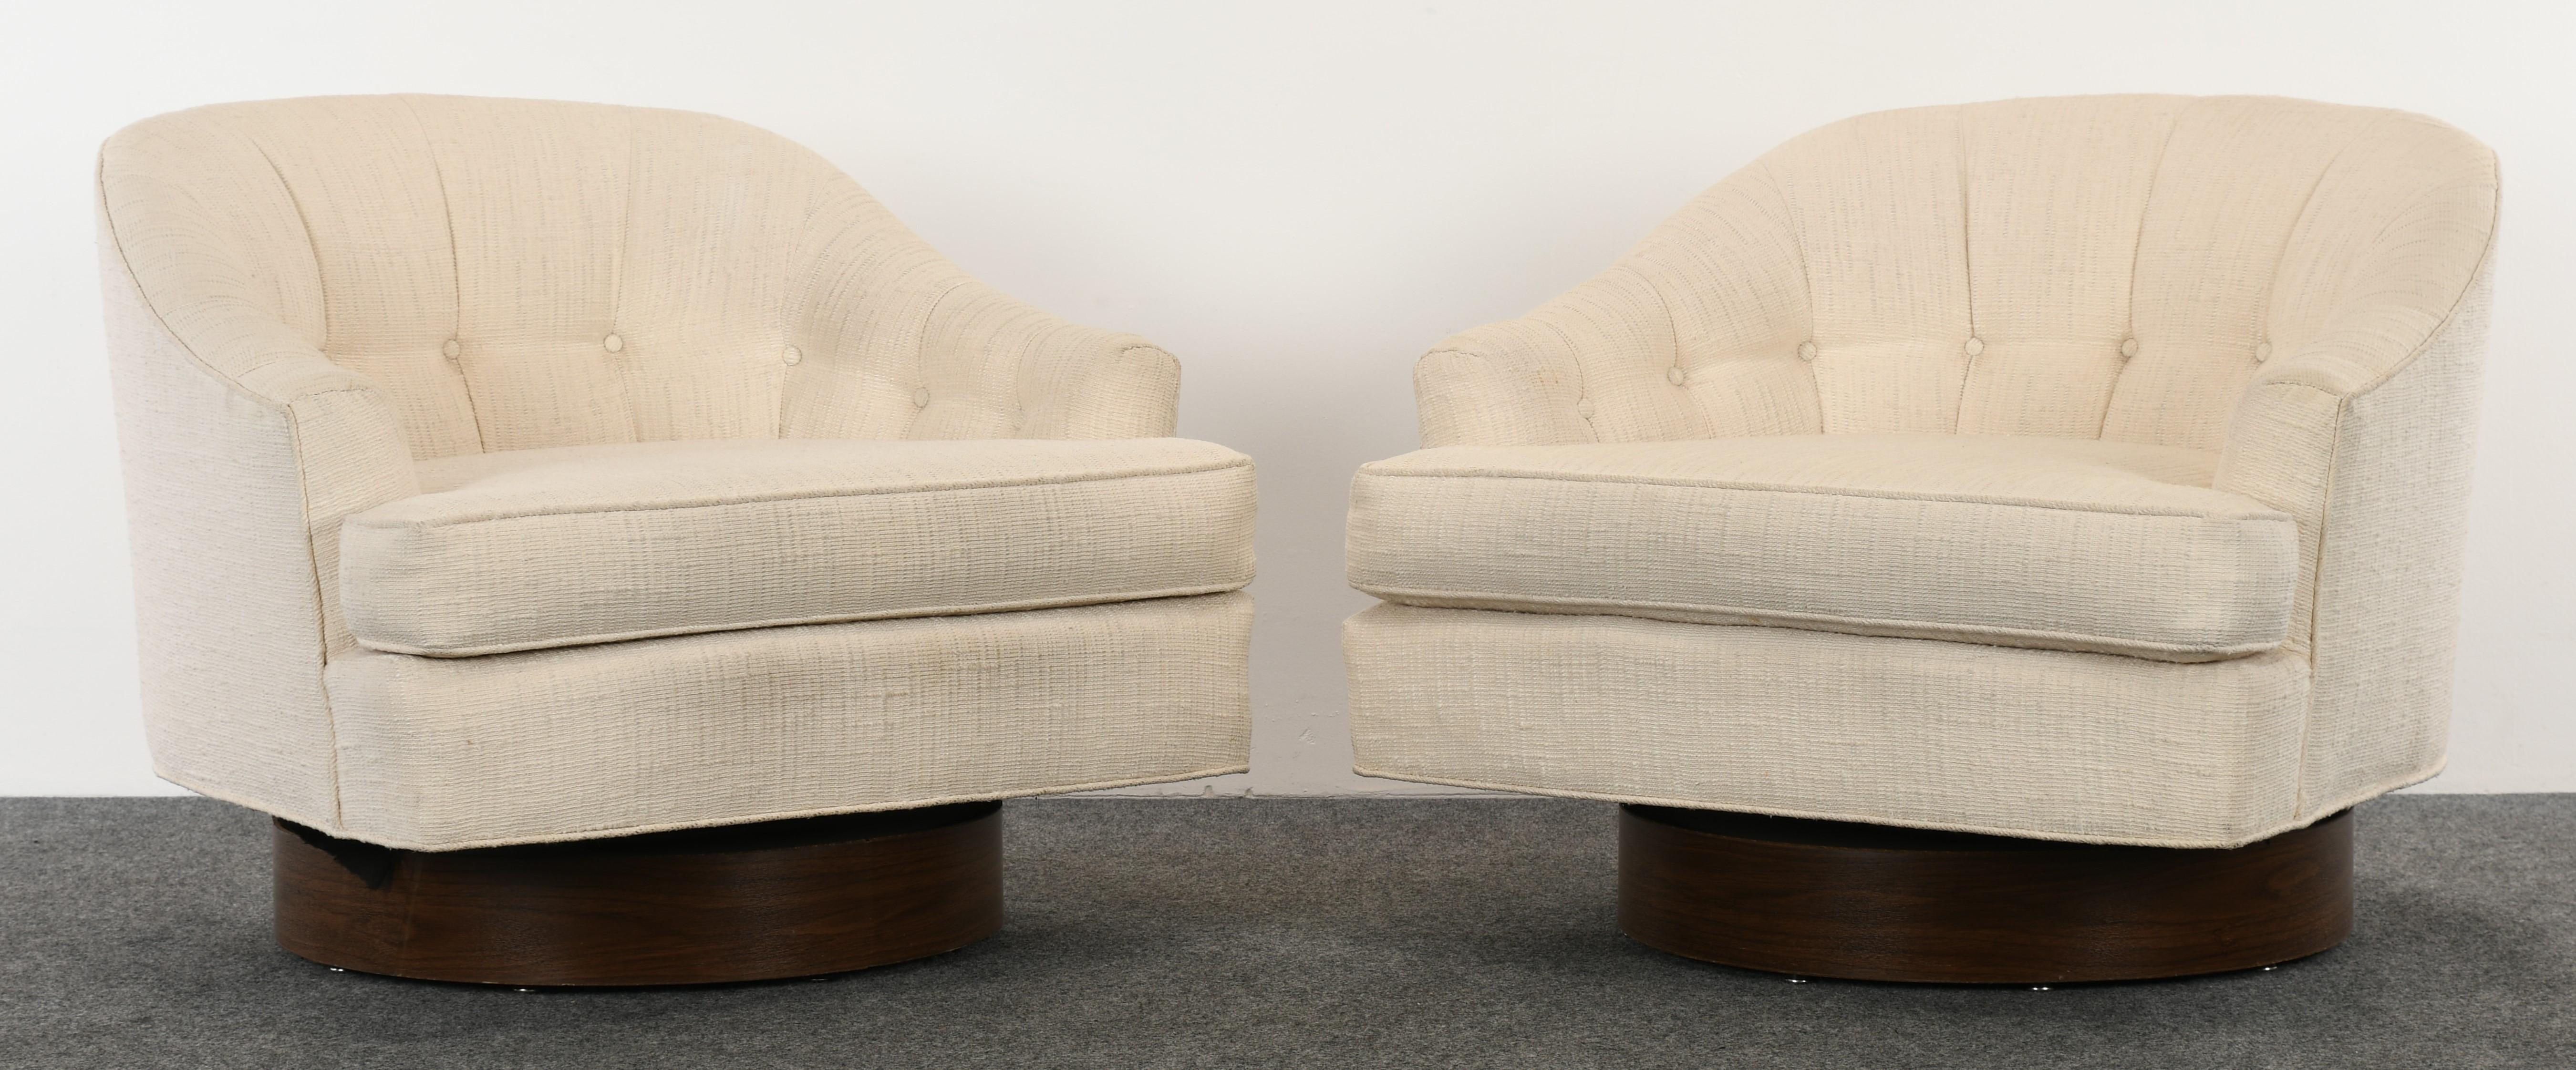 A pair of Milo Baughman style swivel chairs, possibly made by Selig. The chairs have walnut finish bases that appear to be a superb photocopy of veneer, well-done looks exactly like wood. The chairs are structurally sound and in very good condition